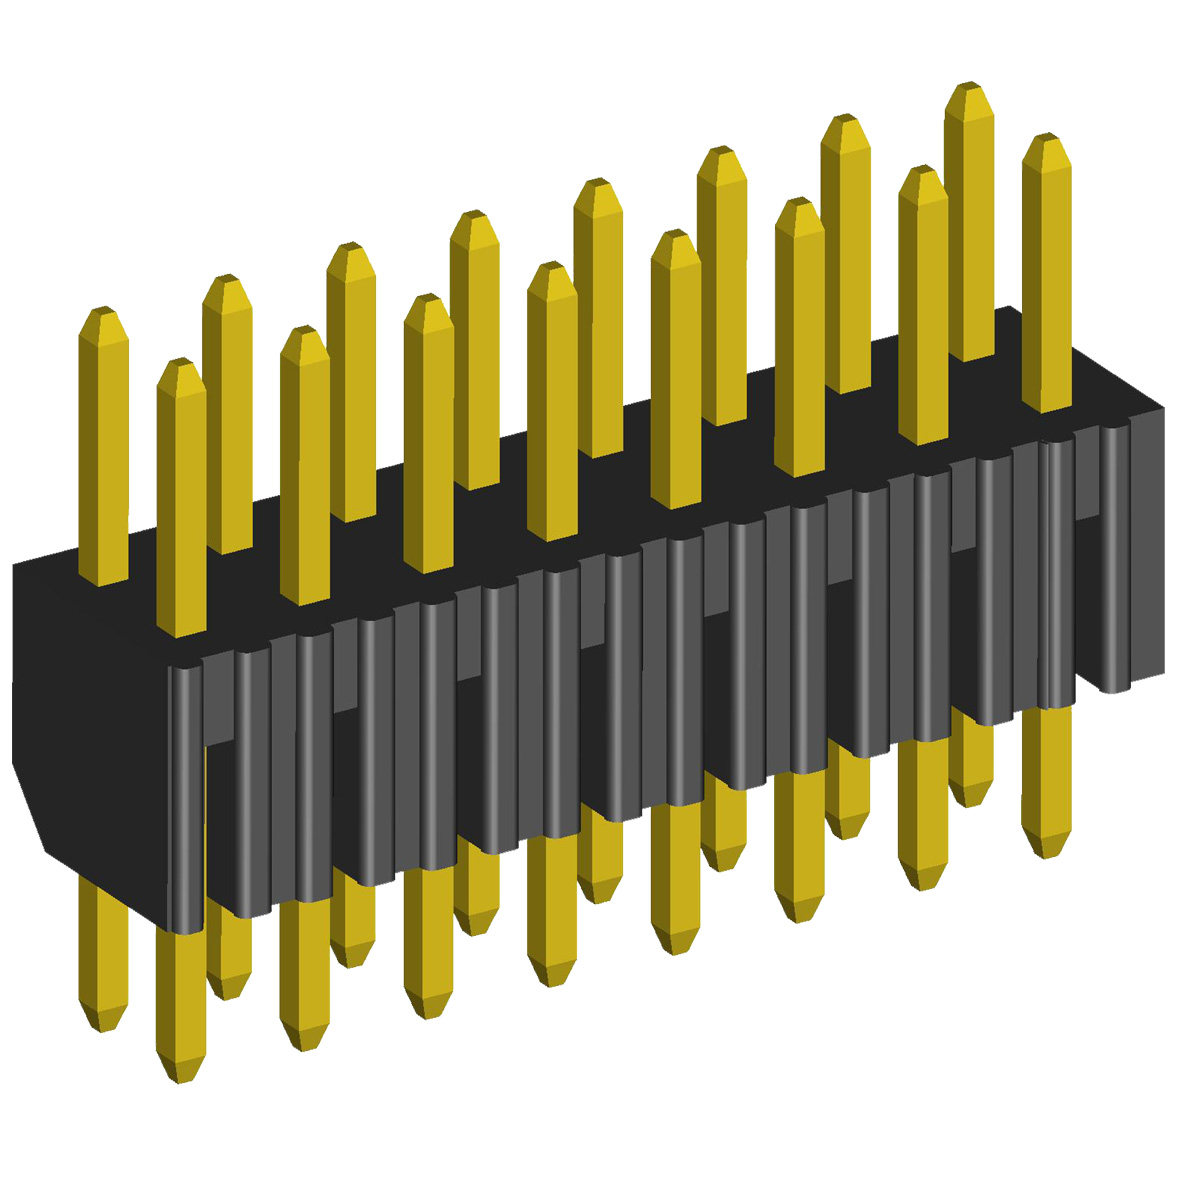 2204S-XXG-XXXX series, plugs pin header straight double row open on the Board with a larger insulator for installation in a hole, pitch 2,0x2,0 mm, 2x40 pins